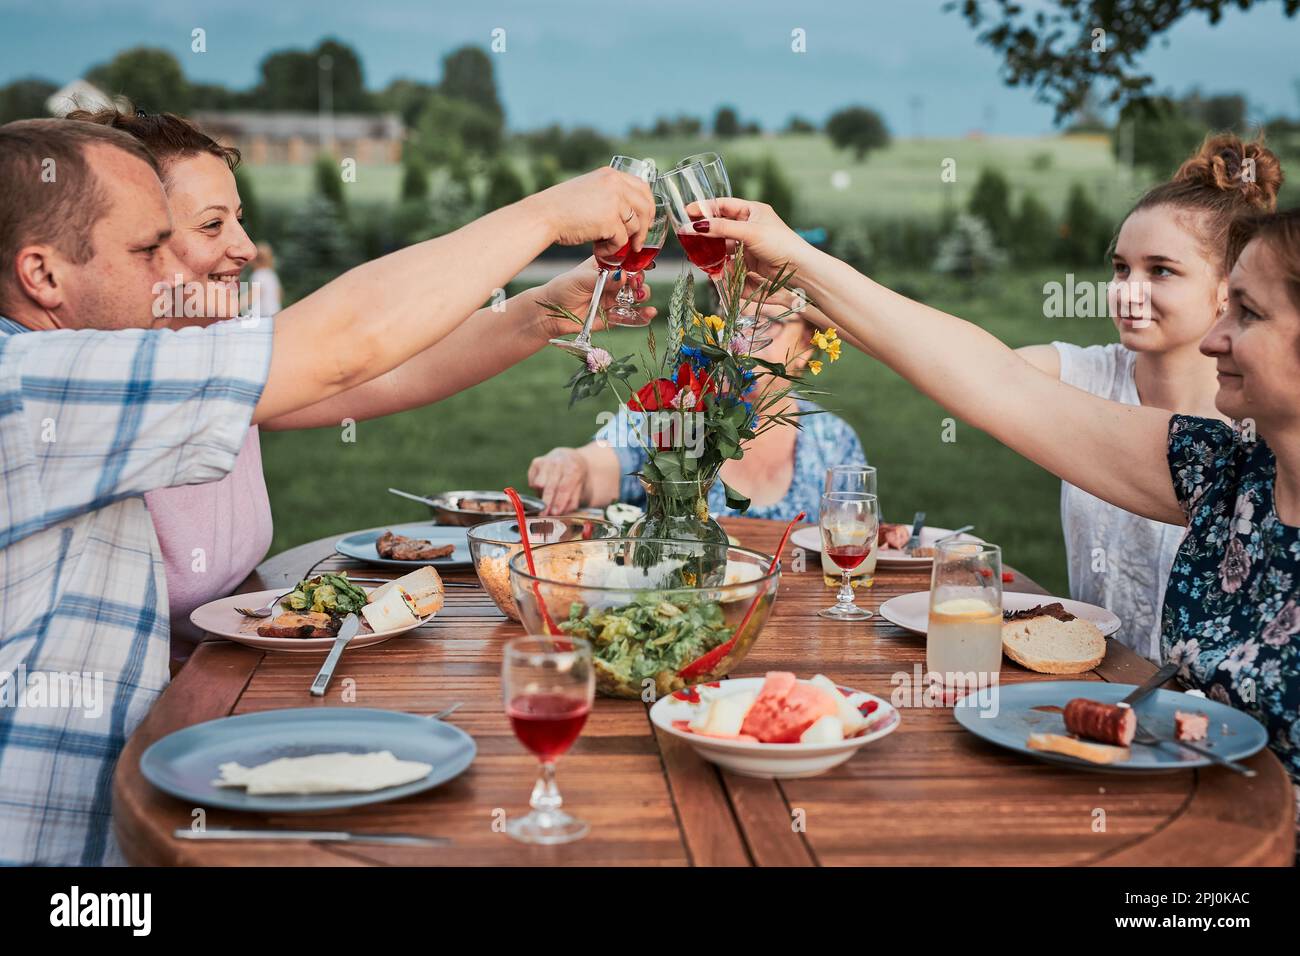 Family making toast during summer picnic outdoor dinner in a home garden. Close up of people holding wine glasses with red wine over table with food a Stock Photo